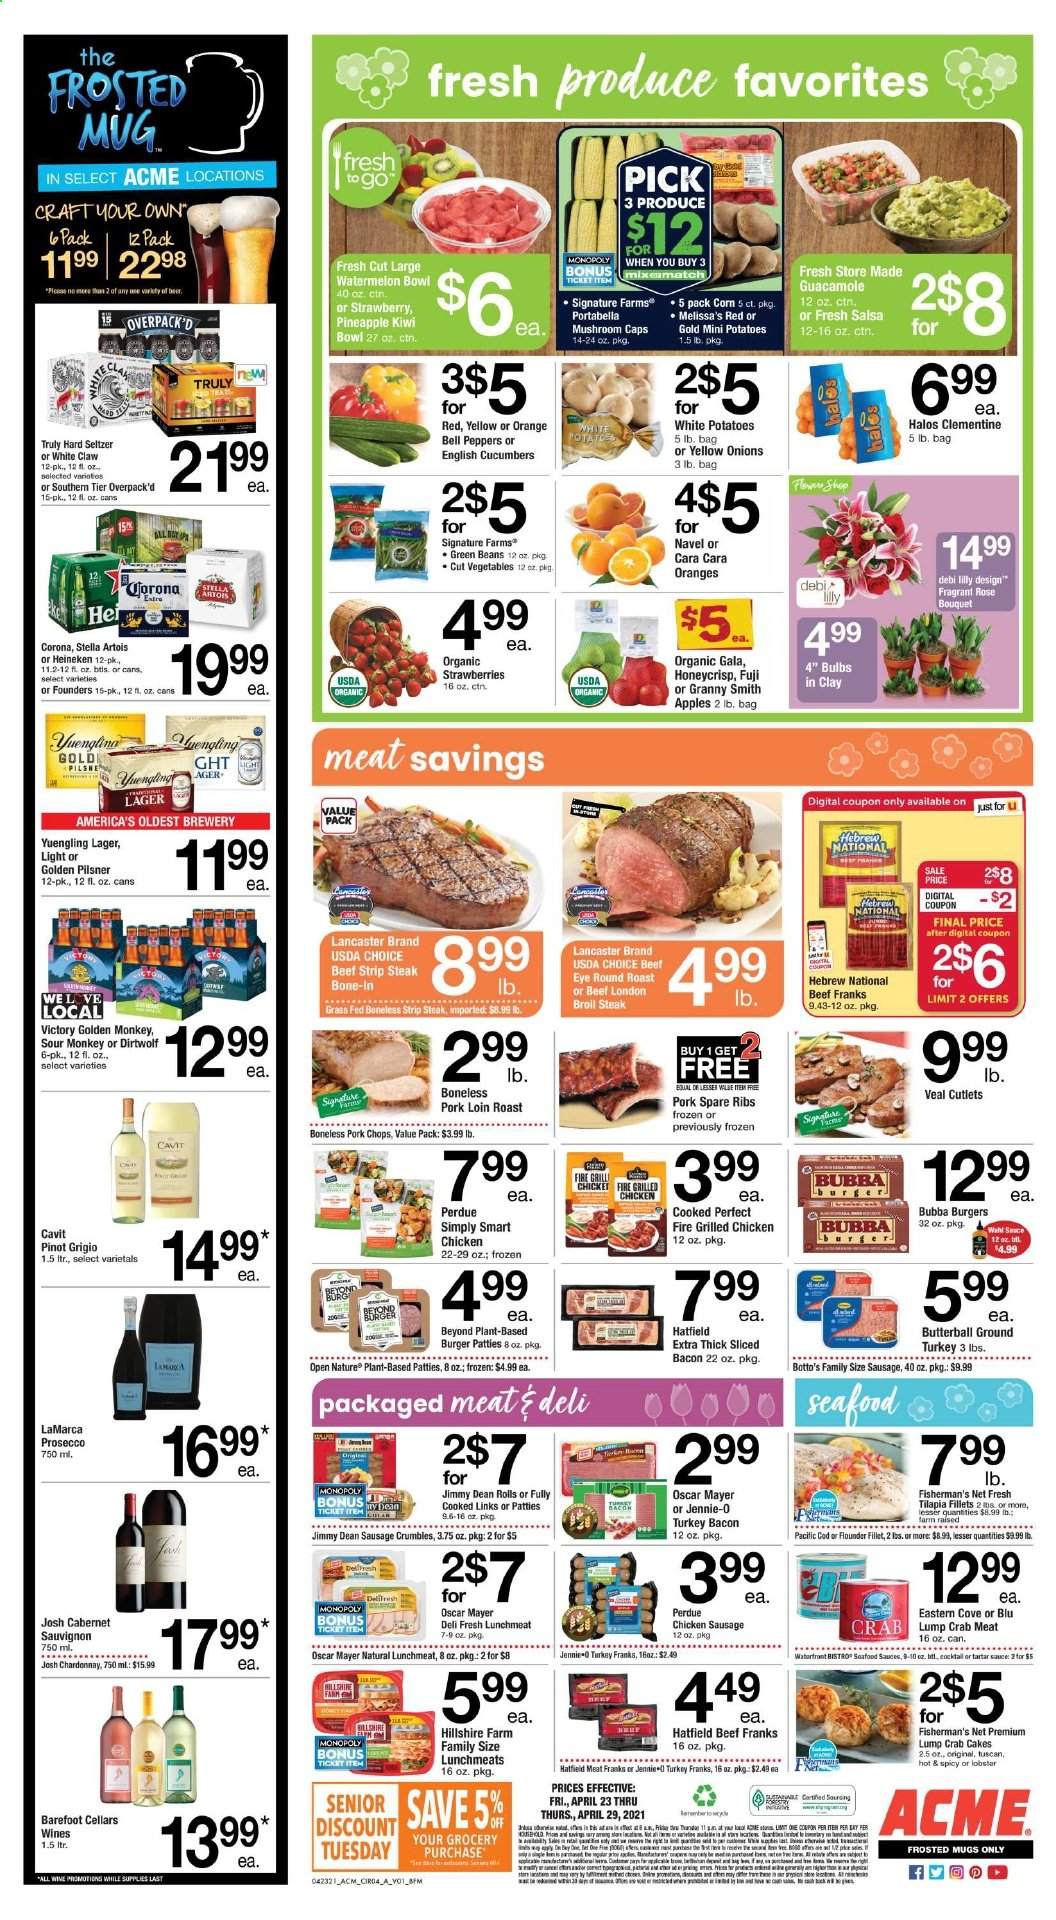 thumbnail - ACME Flyer - 04/23/2021 - 04/29/2021 - Sales products - mushrooms, beans, bell peppers, corn, cucumber, green beans, potatoes, onion, peppers, apples, Gala, kiwi, strawberries, watermelon, oranges, Granny Smith, cod, crab meat, flounder, lobster, tilapia, crab cake, Perdue®, Jimmy Dean, bacon, Butterball, turkey bacon, Hillshire Farm, Oscar Mayer, sausage, chicken sausage, guacamole, lunch meat, tartar sauce, salsa, Cabernet Sauvignon, white wine, prosecco, Chardonnay, Pinot Grigio, rosé wine, White Claw, Hard Seltzer, TRULY, beer, Stella Artois, Yuengling, Corona Extra, Heineken, Lager, Golden Pilsner, Victory Golden, ground turkey, beef meat, veal cutlet, veal meat, steak, eye of round, round roast, striploin steak, burger patties, pork chops, pork loin, pork meat, pork ribs, pork spare ribs, mug, bowl, bulb, cap, monkey, pineapple. Page 4.